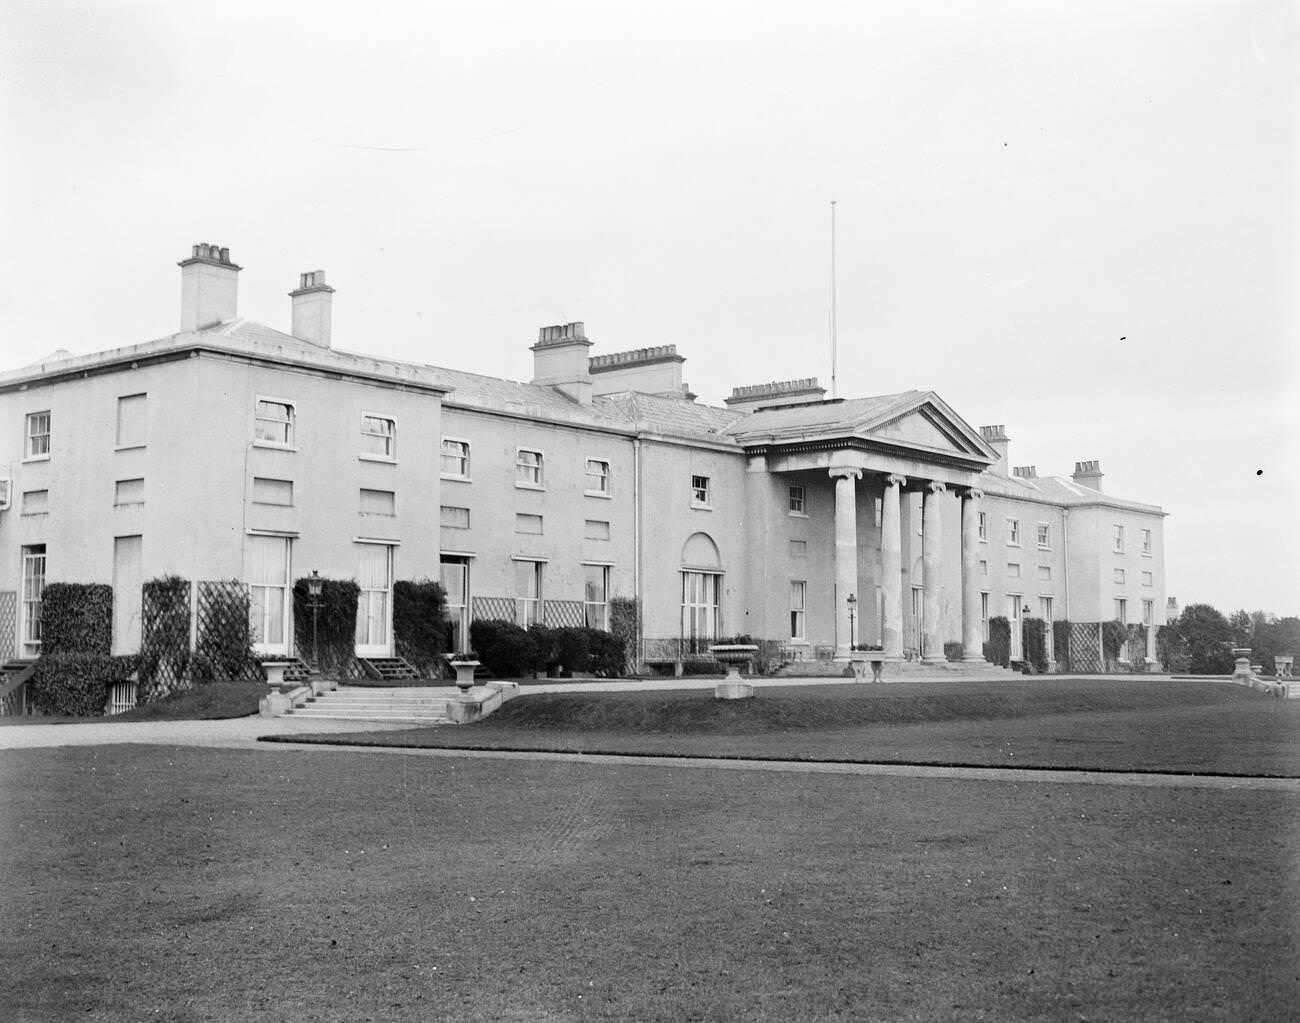 The Irish Governor General's first speech to both houses at the Vice Regal Lodge, Dublin, 1922.